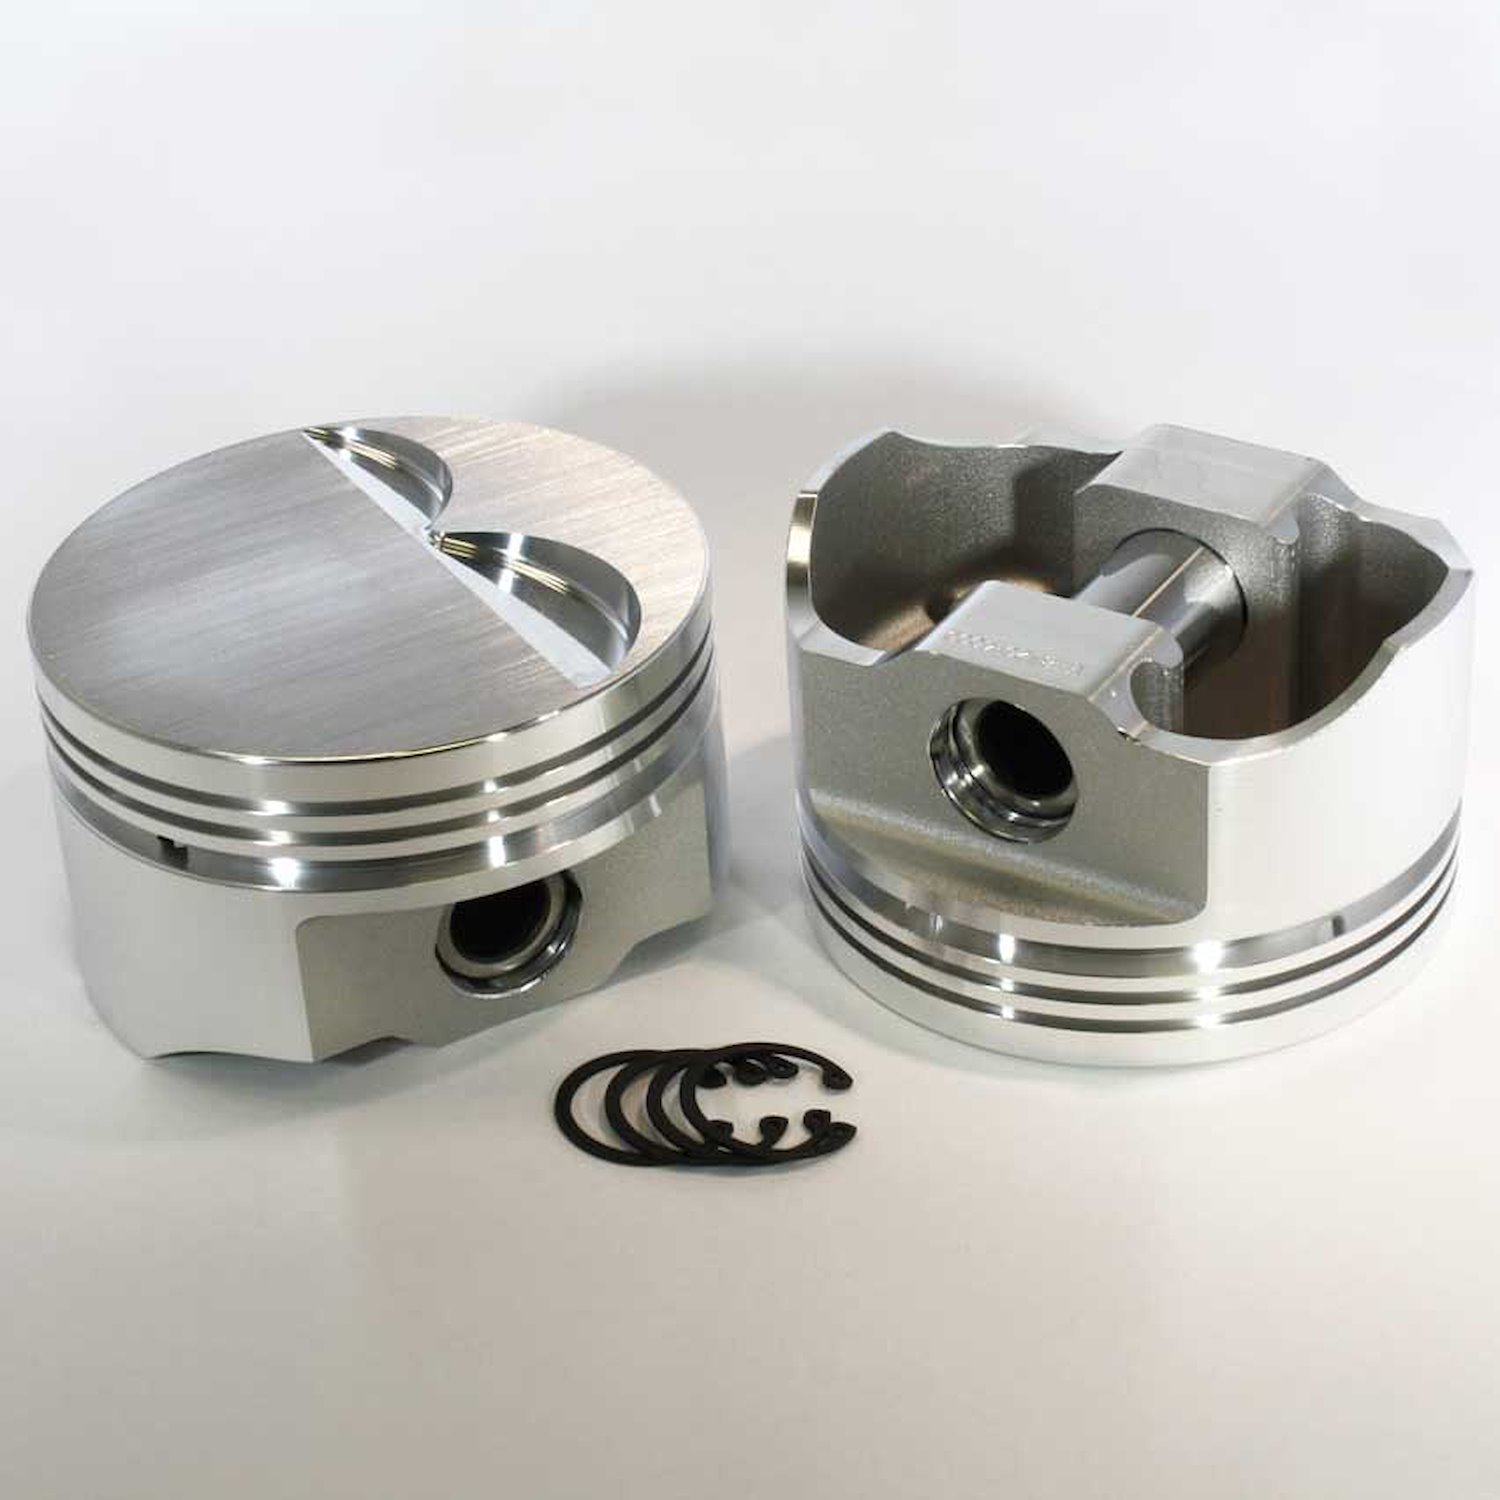 8770-3840 E-Series Flat Top Piston Set for 1997-2005 Chevy LS, 3.840 in. Bore, -3cc Volume [OEM Stroke]